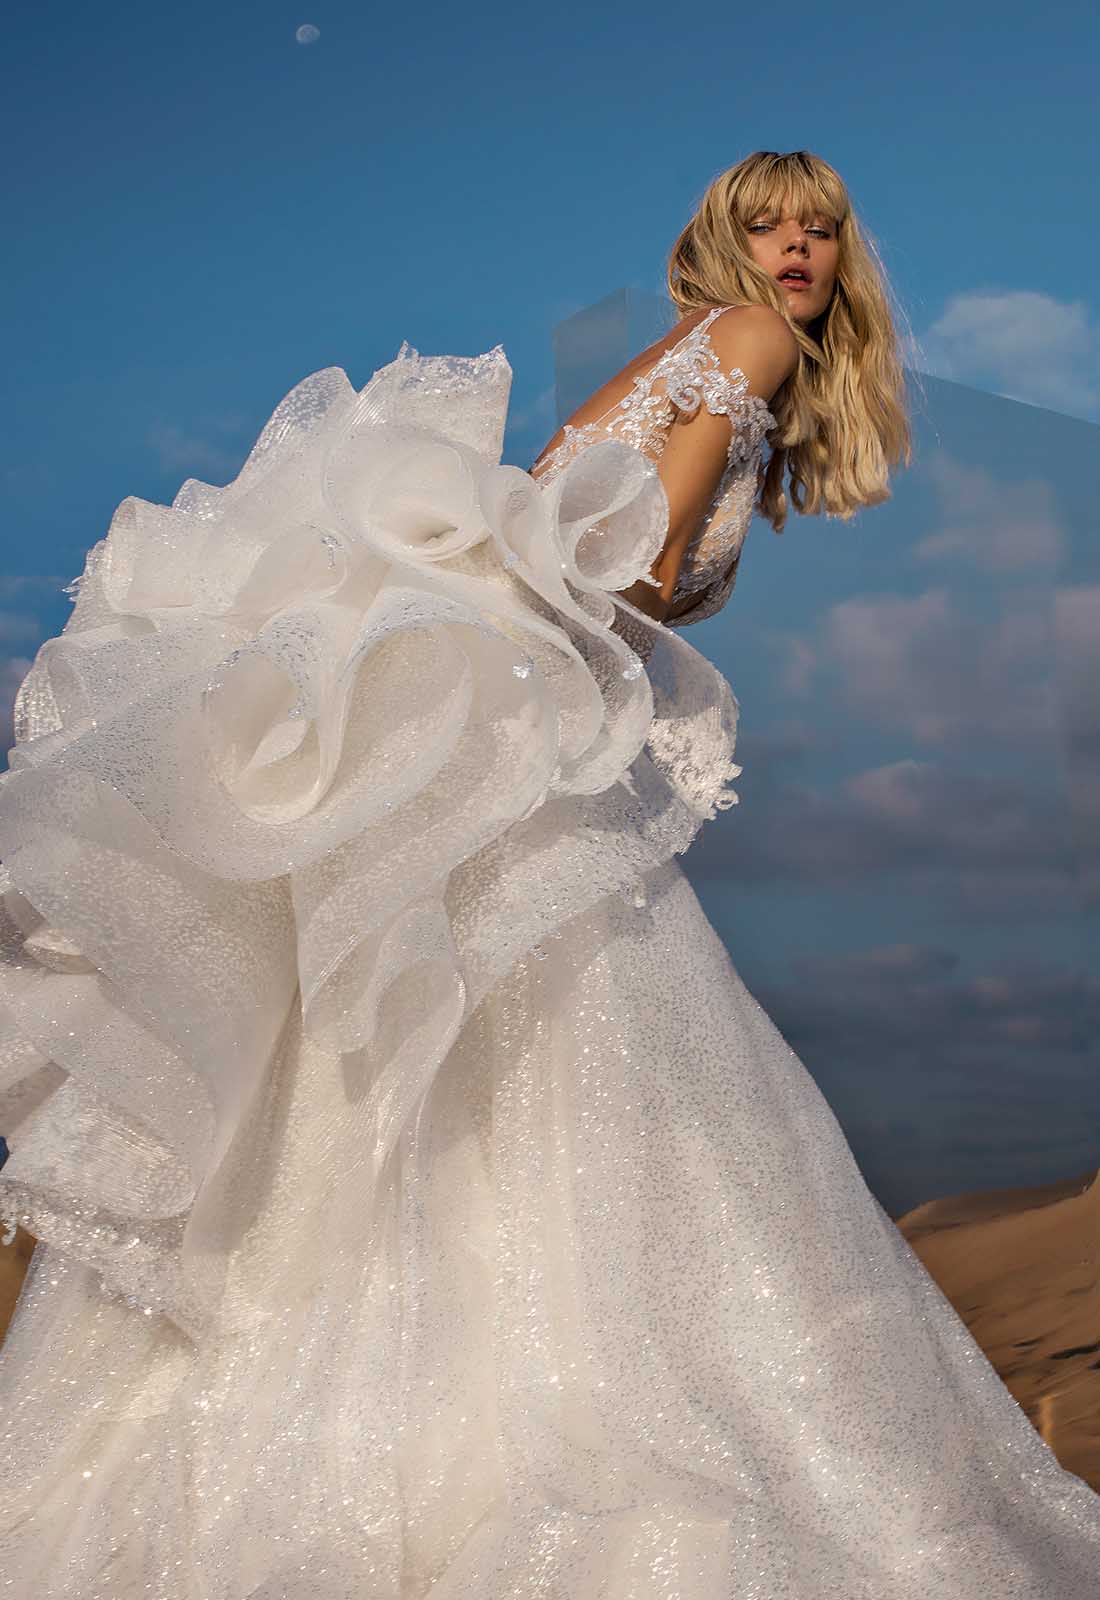 Elegant Pnina Tornai Big Ballgown Wedding Dress With Sweetheart Neckline,  Sleeveless Design, Backless Design And Handmade Flower Embellishments,  Featuring A Sweep Train Br2742 From Yuoy, $128.02